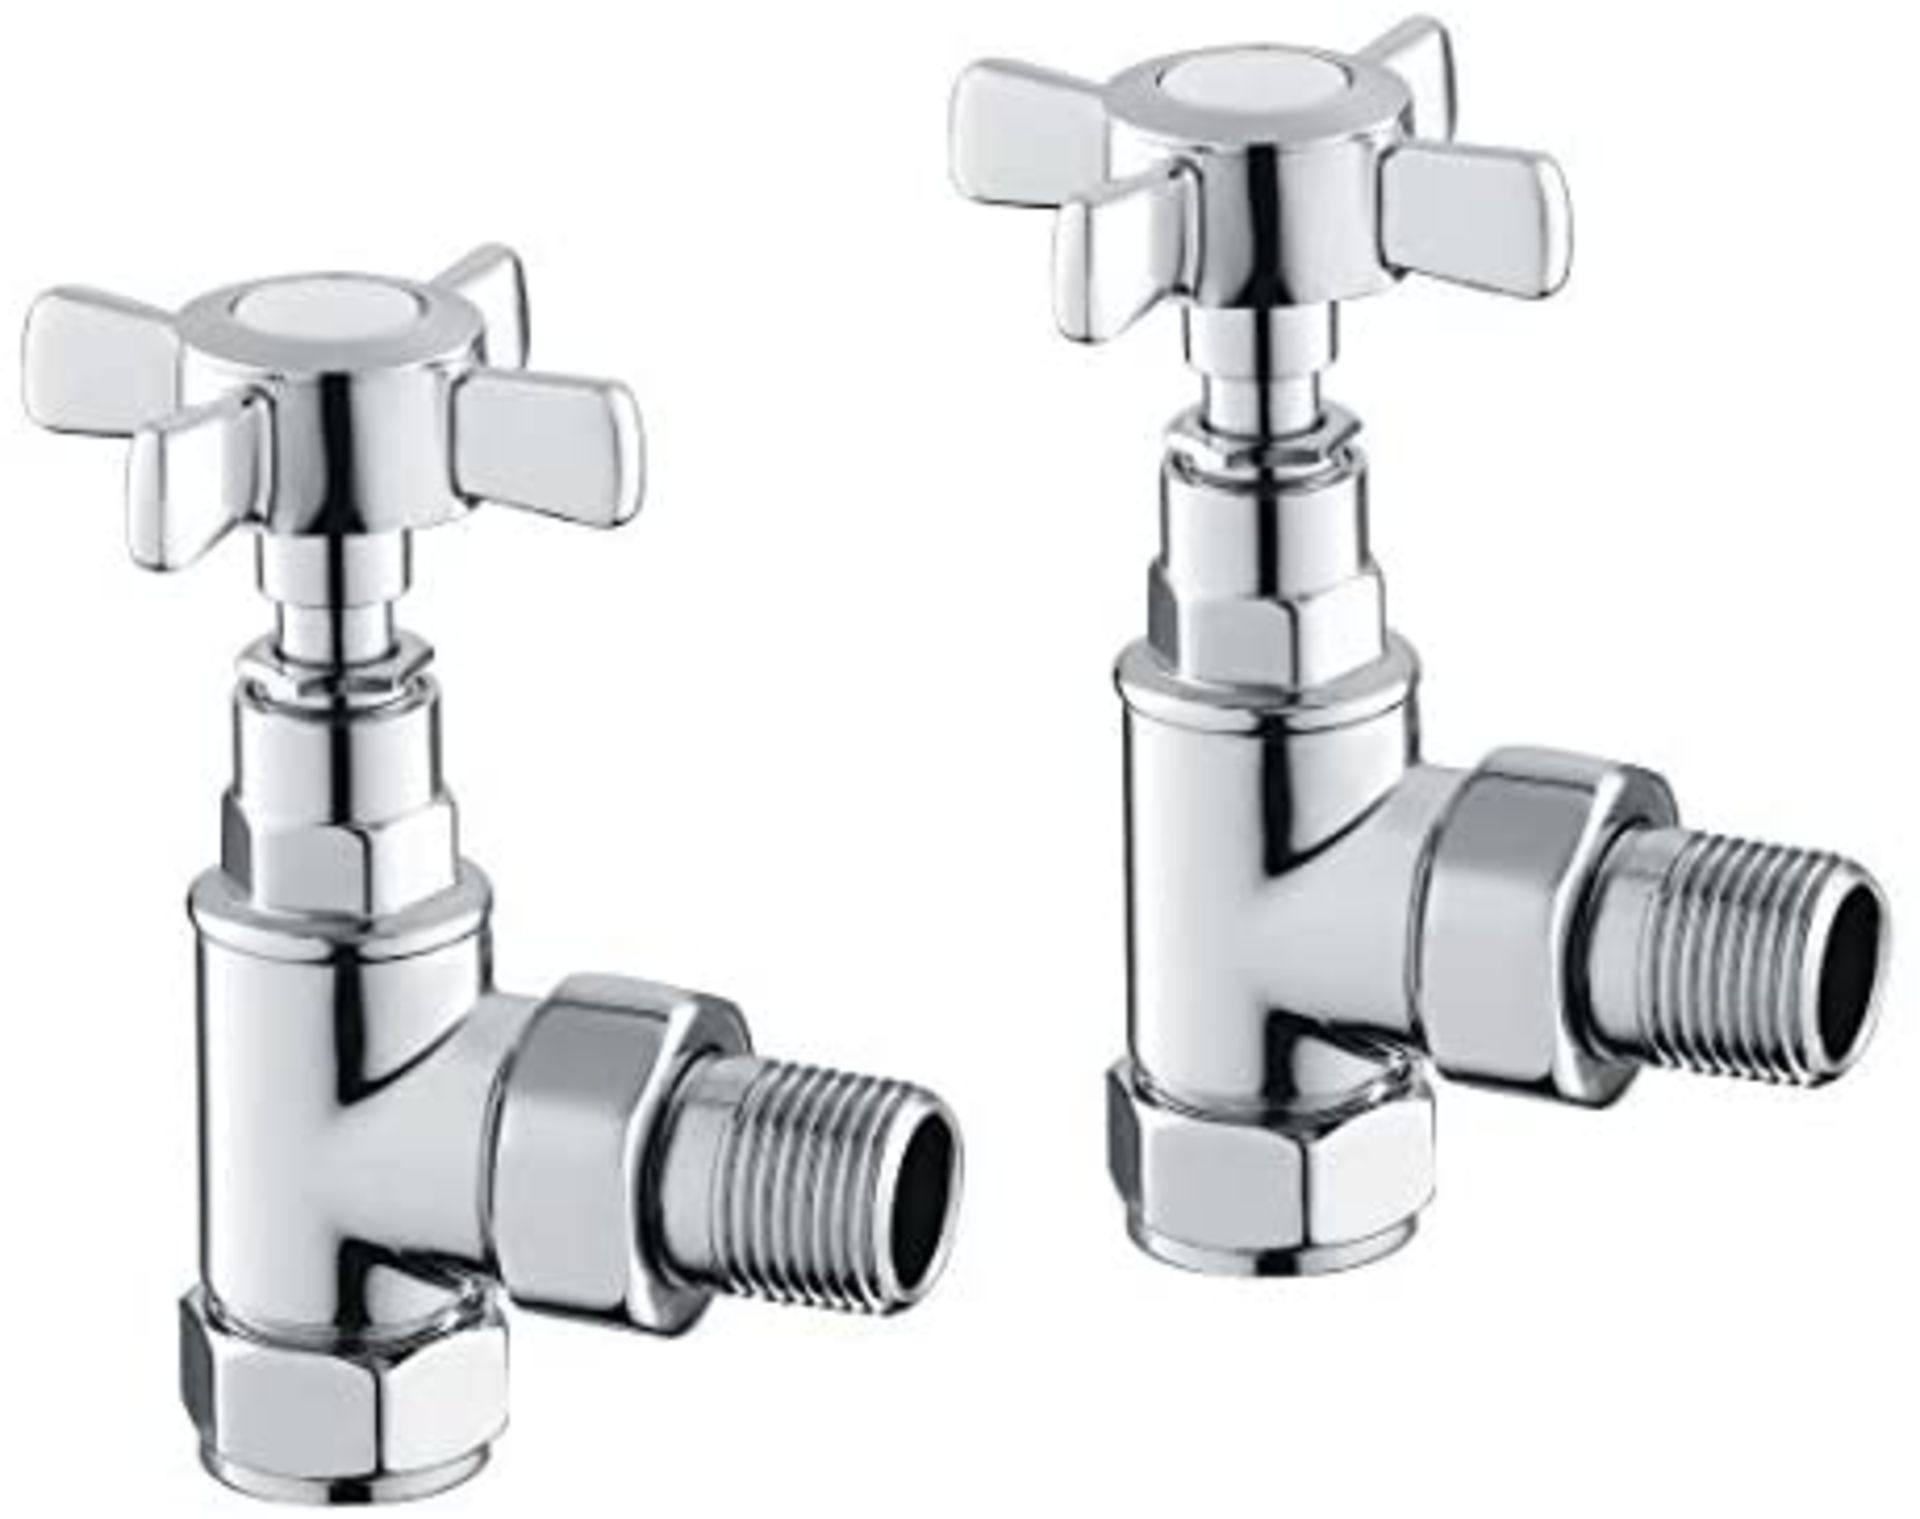 (GC1021) Traditional Chrome Angled Radiator Valves 15mm Central Heating Taps RA04A. Standard 1...